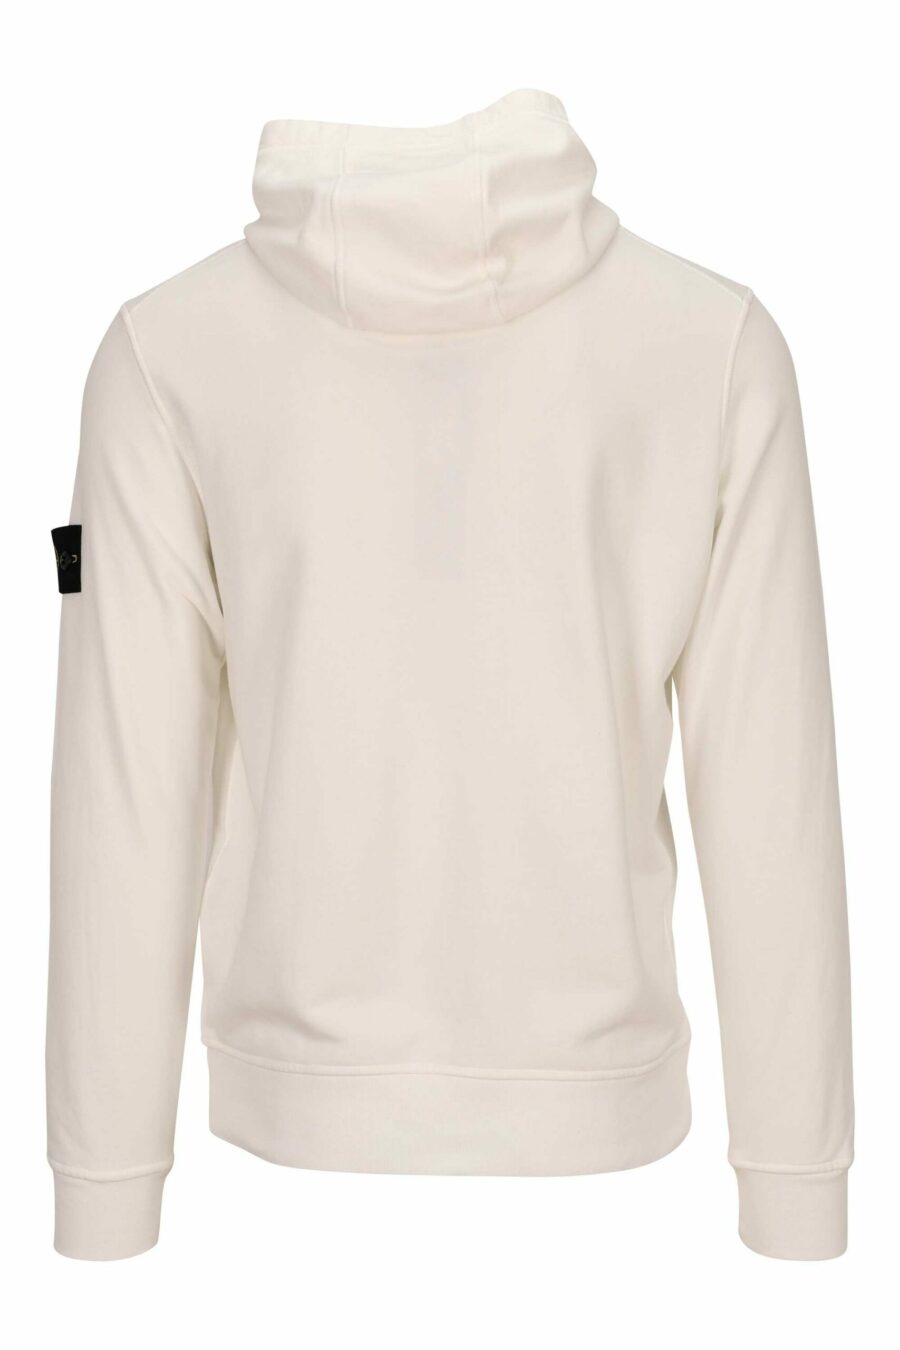 White hooded sweatshirt with compass logo patch - 8052572854187 2 scaled